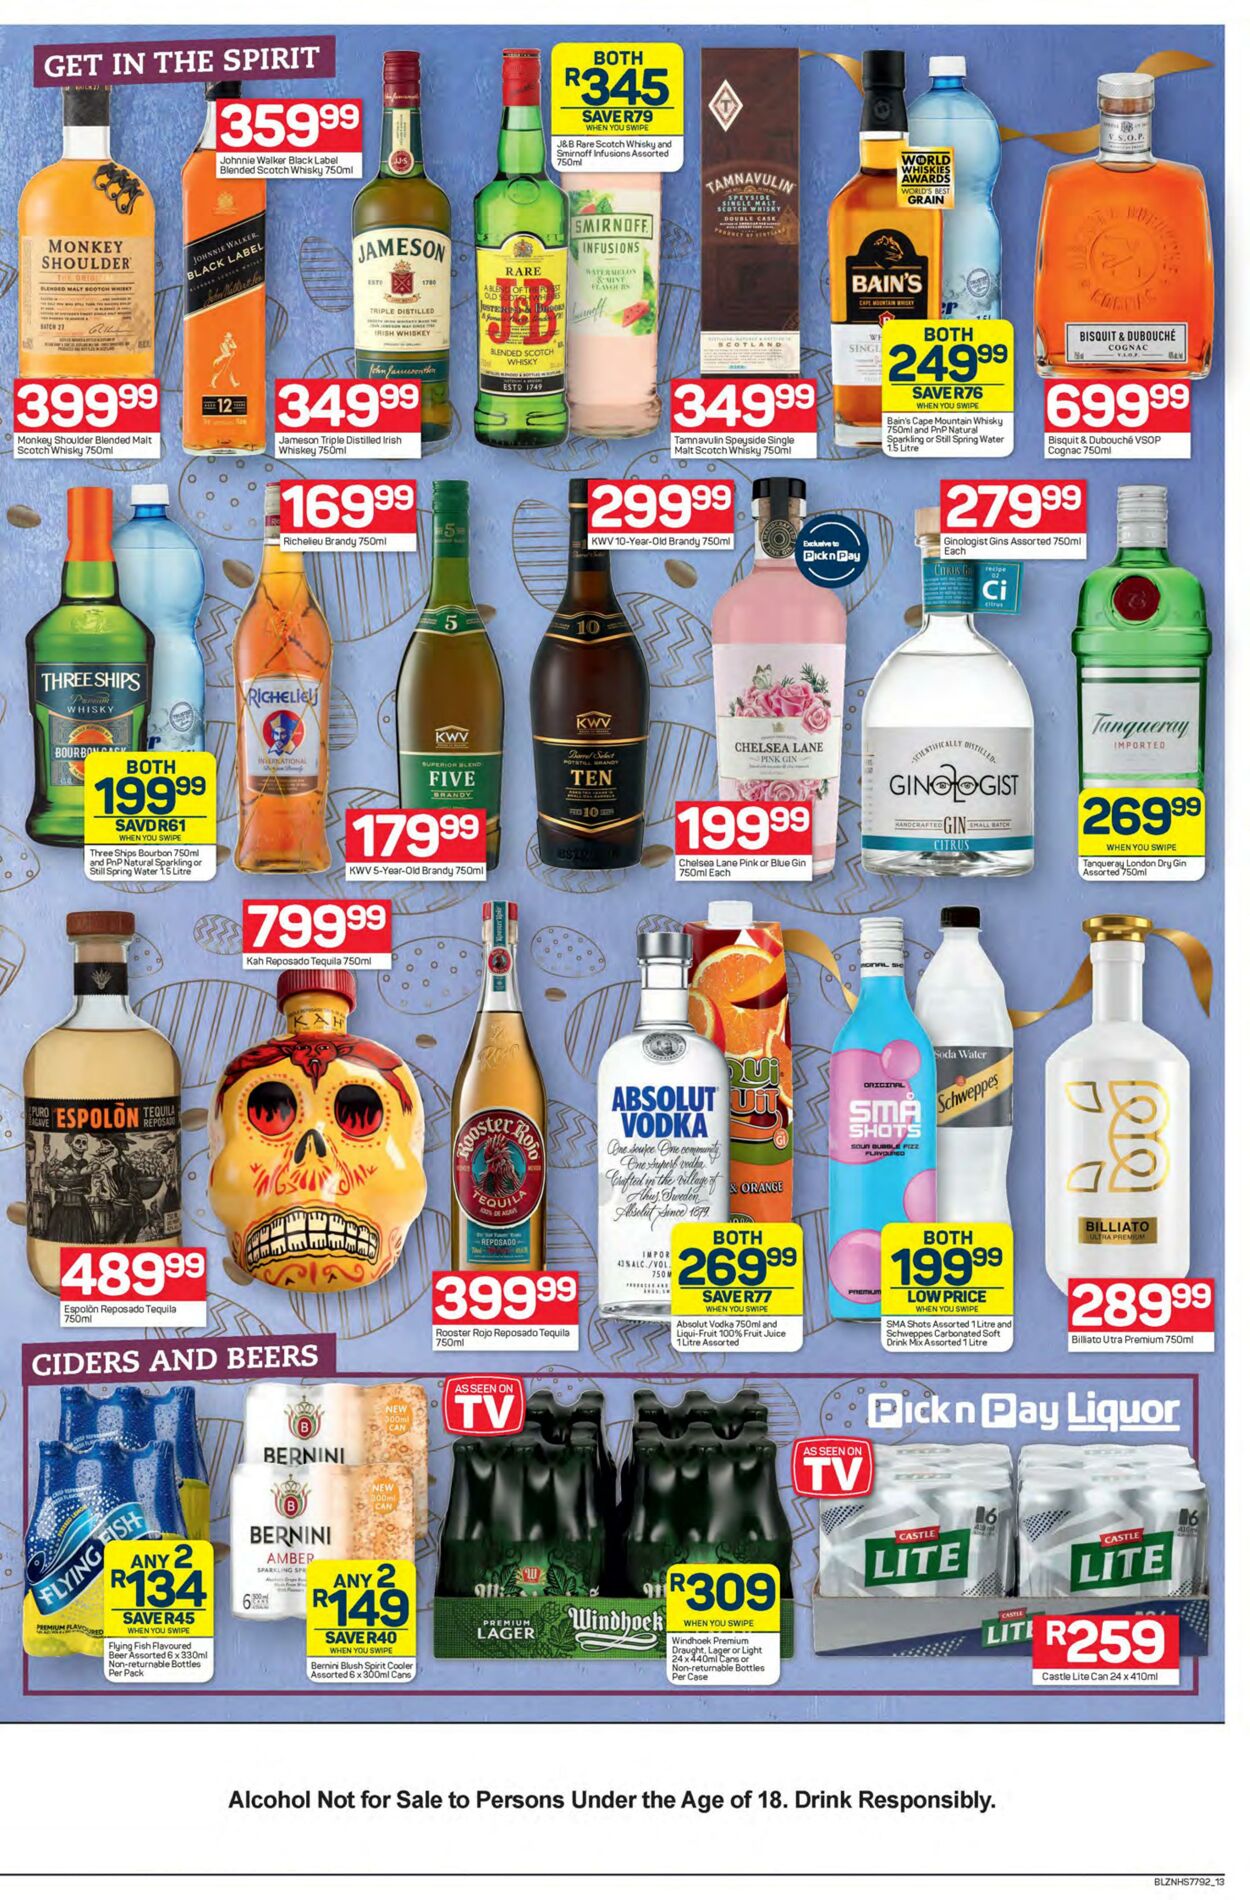 Pick n Pay Promotional Leaflet - Valid from 20.03 to 26.03 - Page nb 13 ...